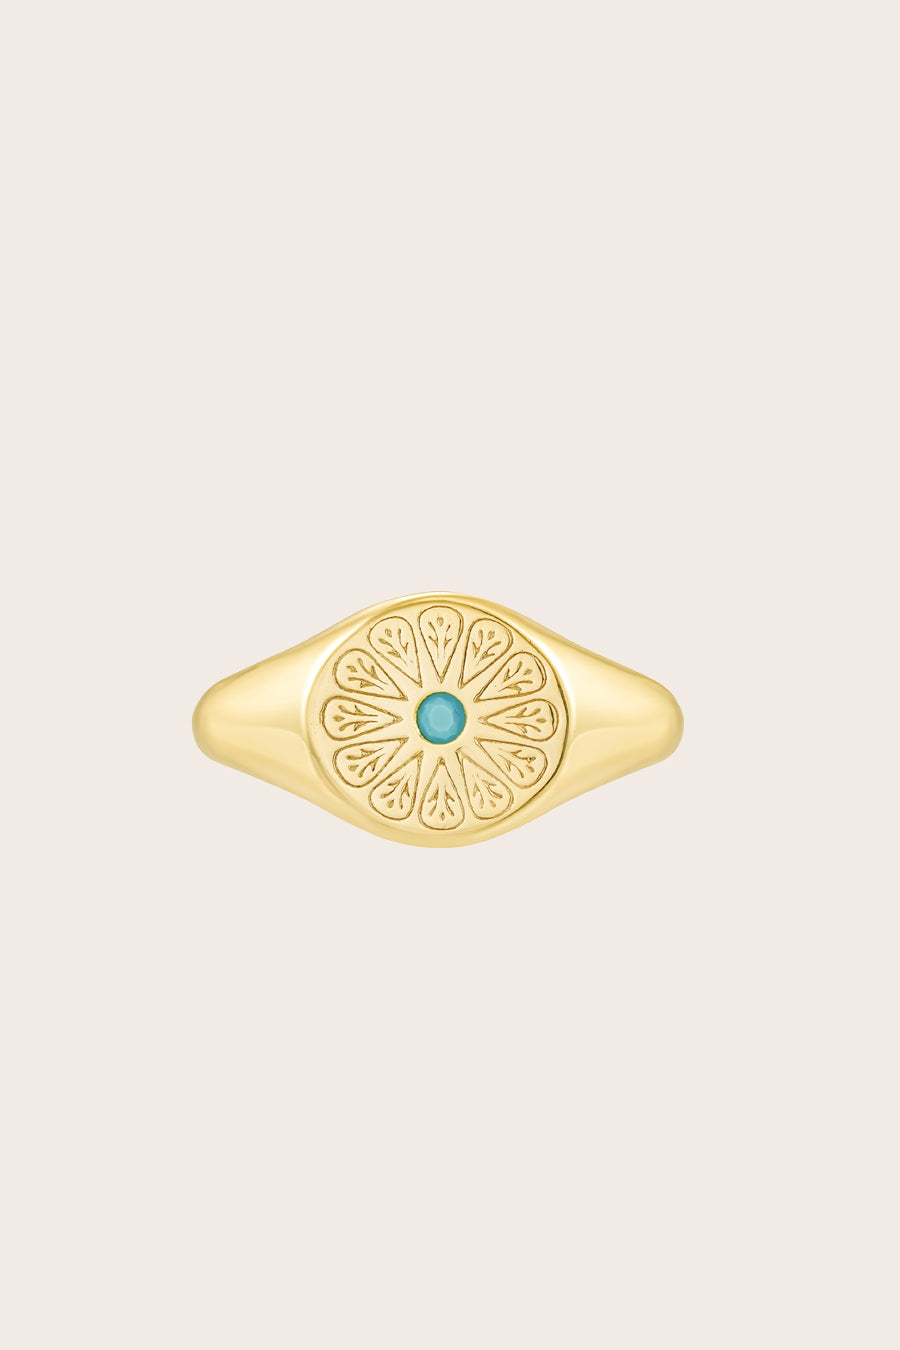 Gold Turquoise December Signet Birthstone Ring on cream background